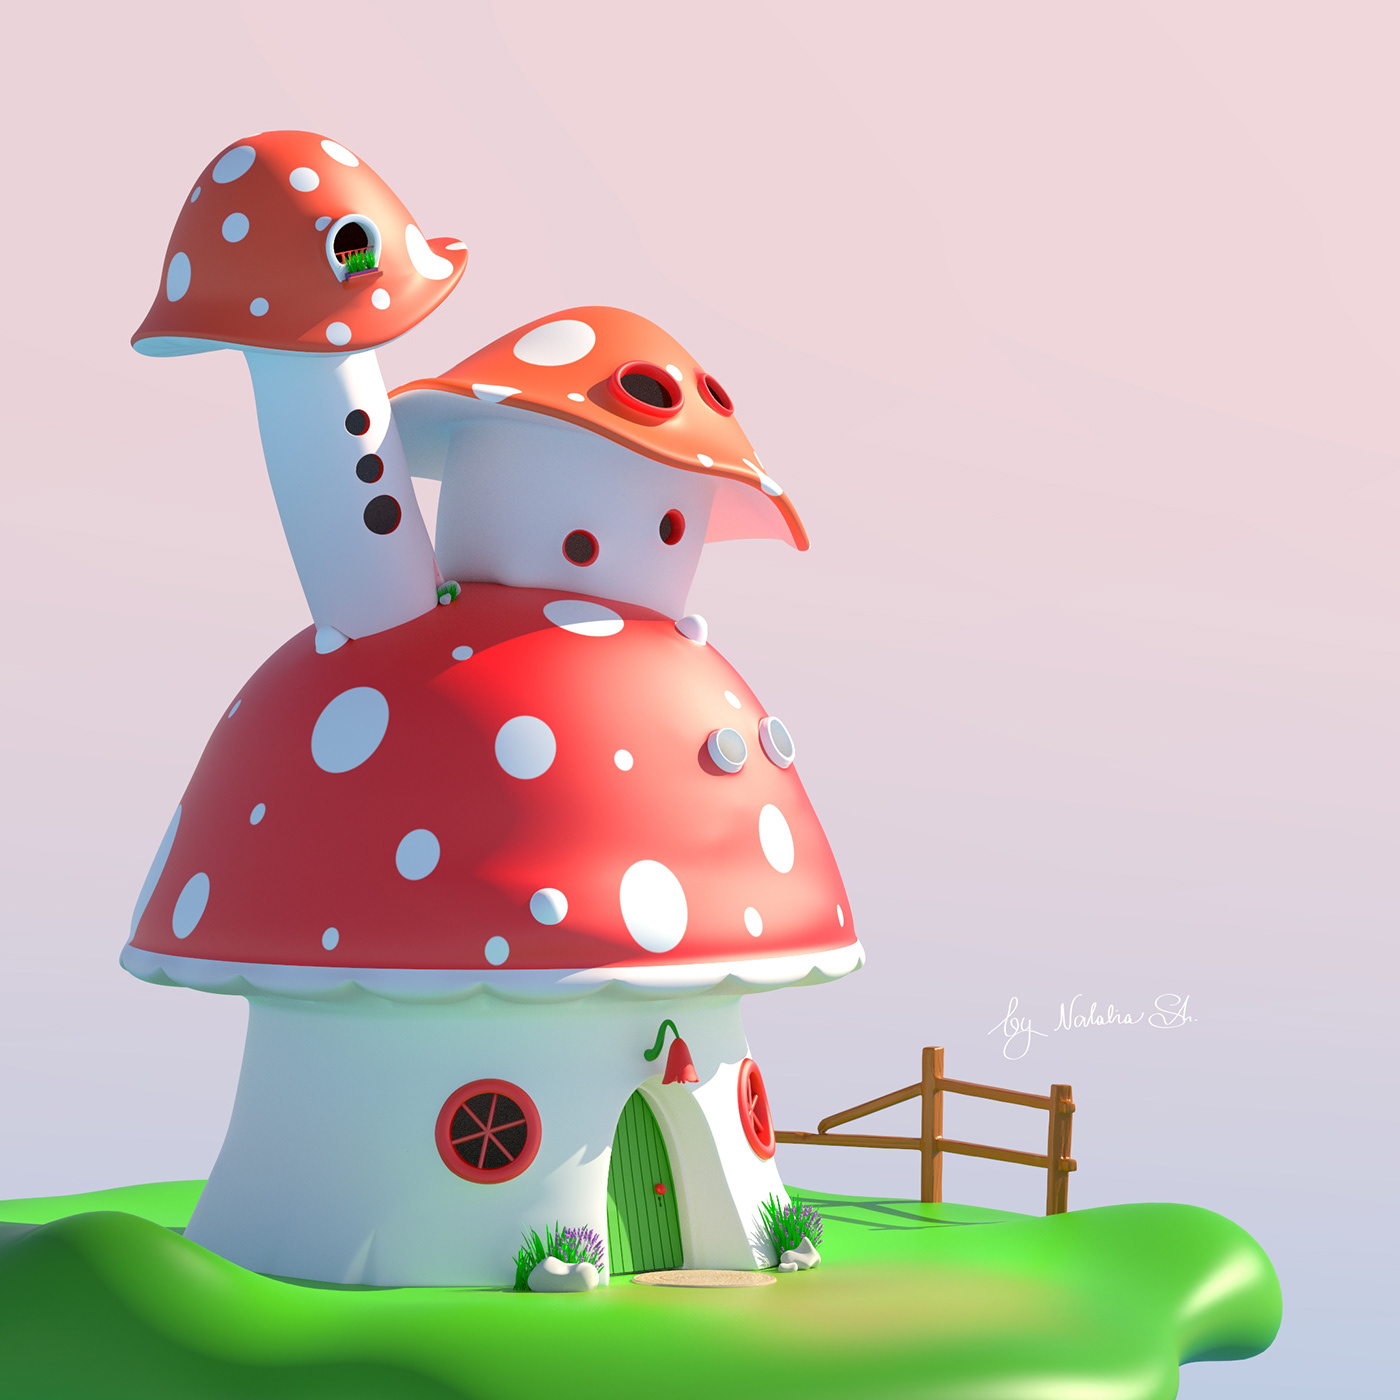 cartoon game location modeling redshift texturing